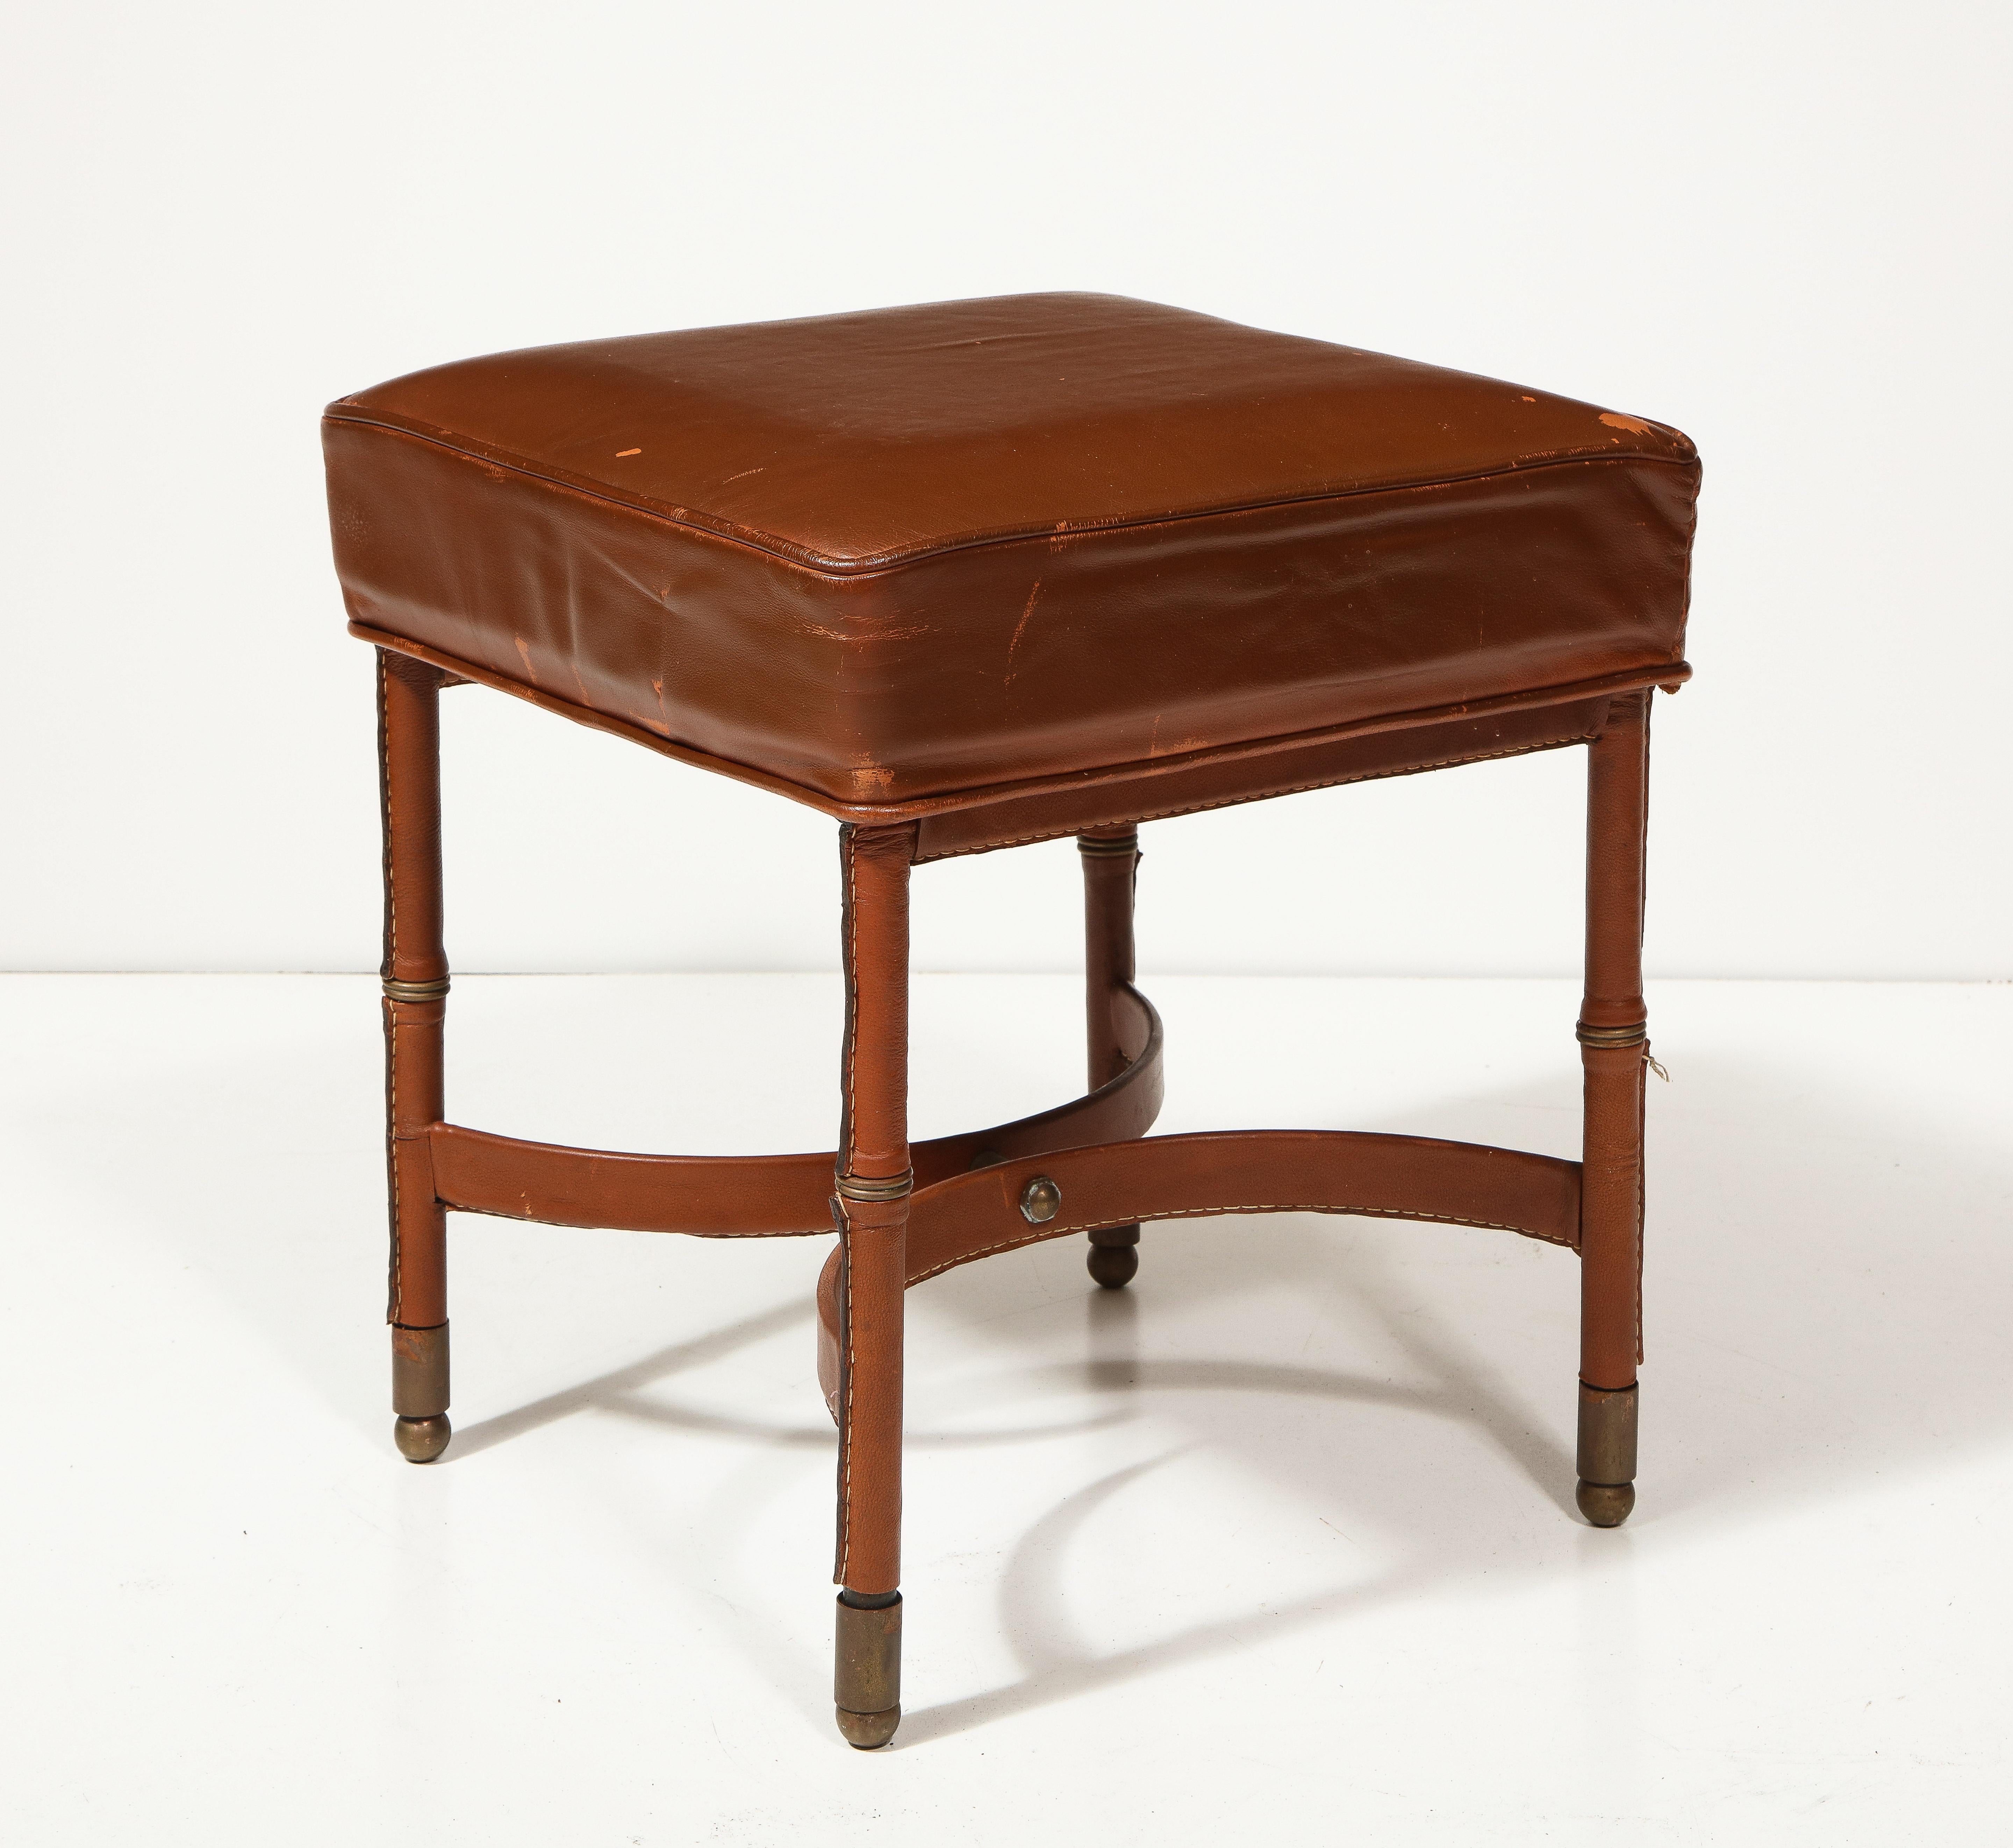 Gorgeous leather stool with stitched leather legs and patinated brass capped feet. This is a great example of Adnet's work; a real collector's item.